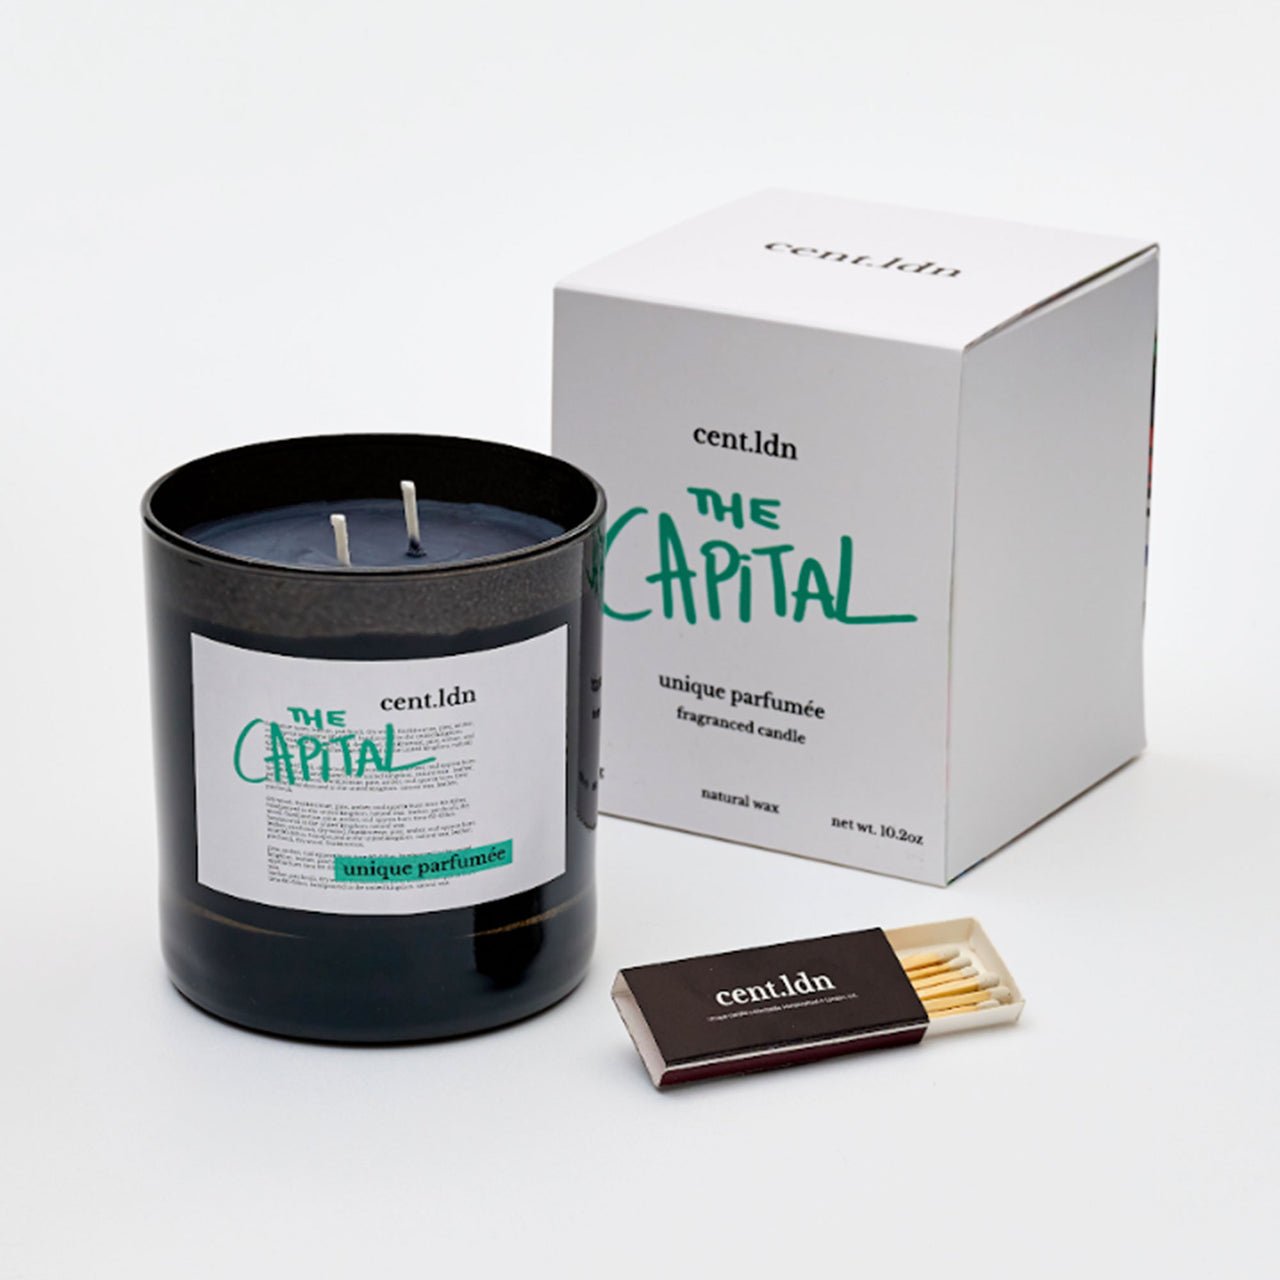 The Capital Perfumed Candle